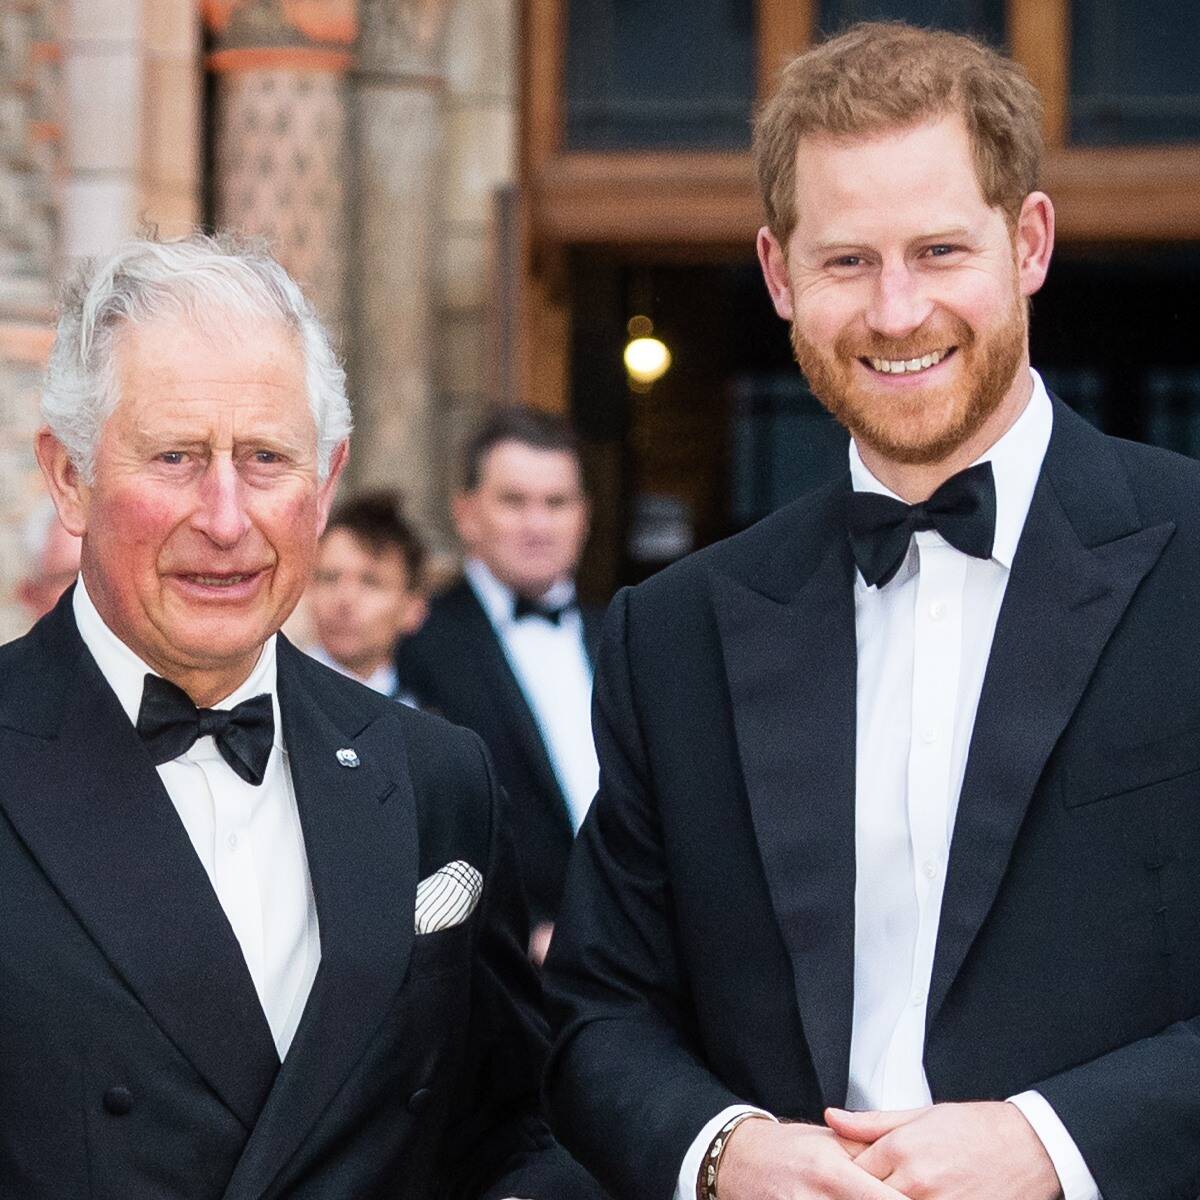 ”prince-harry-reveals-prince-charles-would-no-longer-answer-his-phone-calls-when-he-decided-to-leave-the-palace”